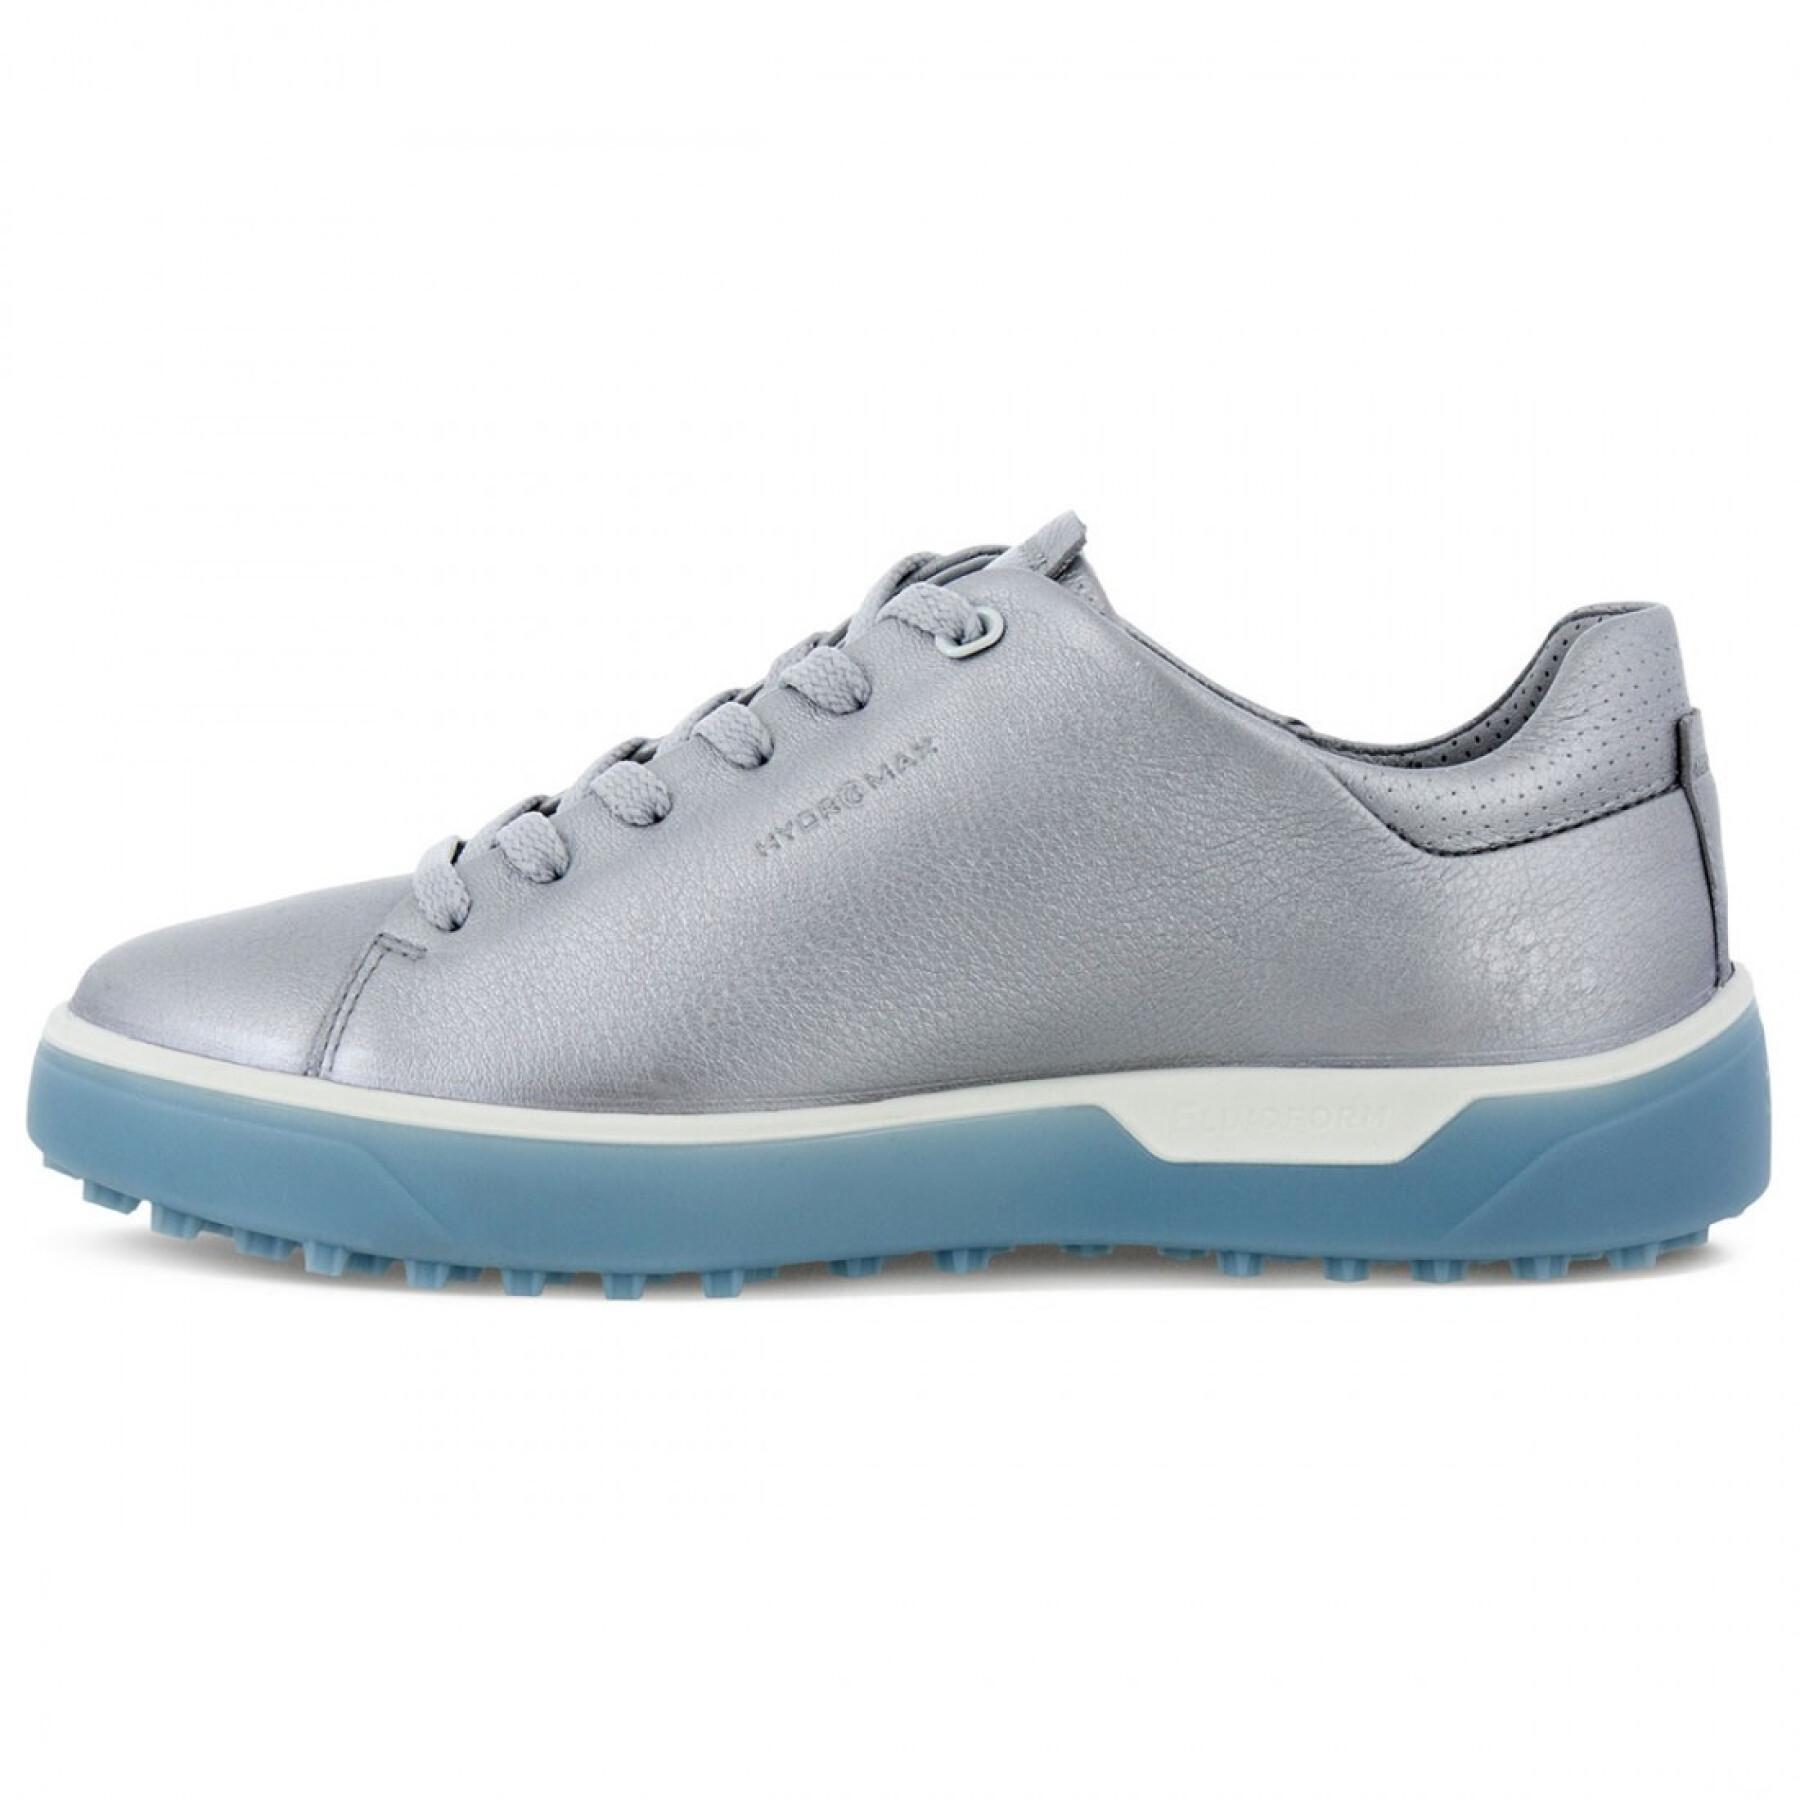 Women's spikeless golf shoes Ecco Tray